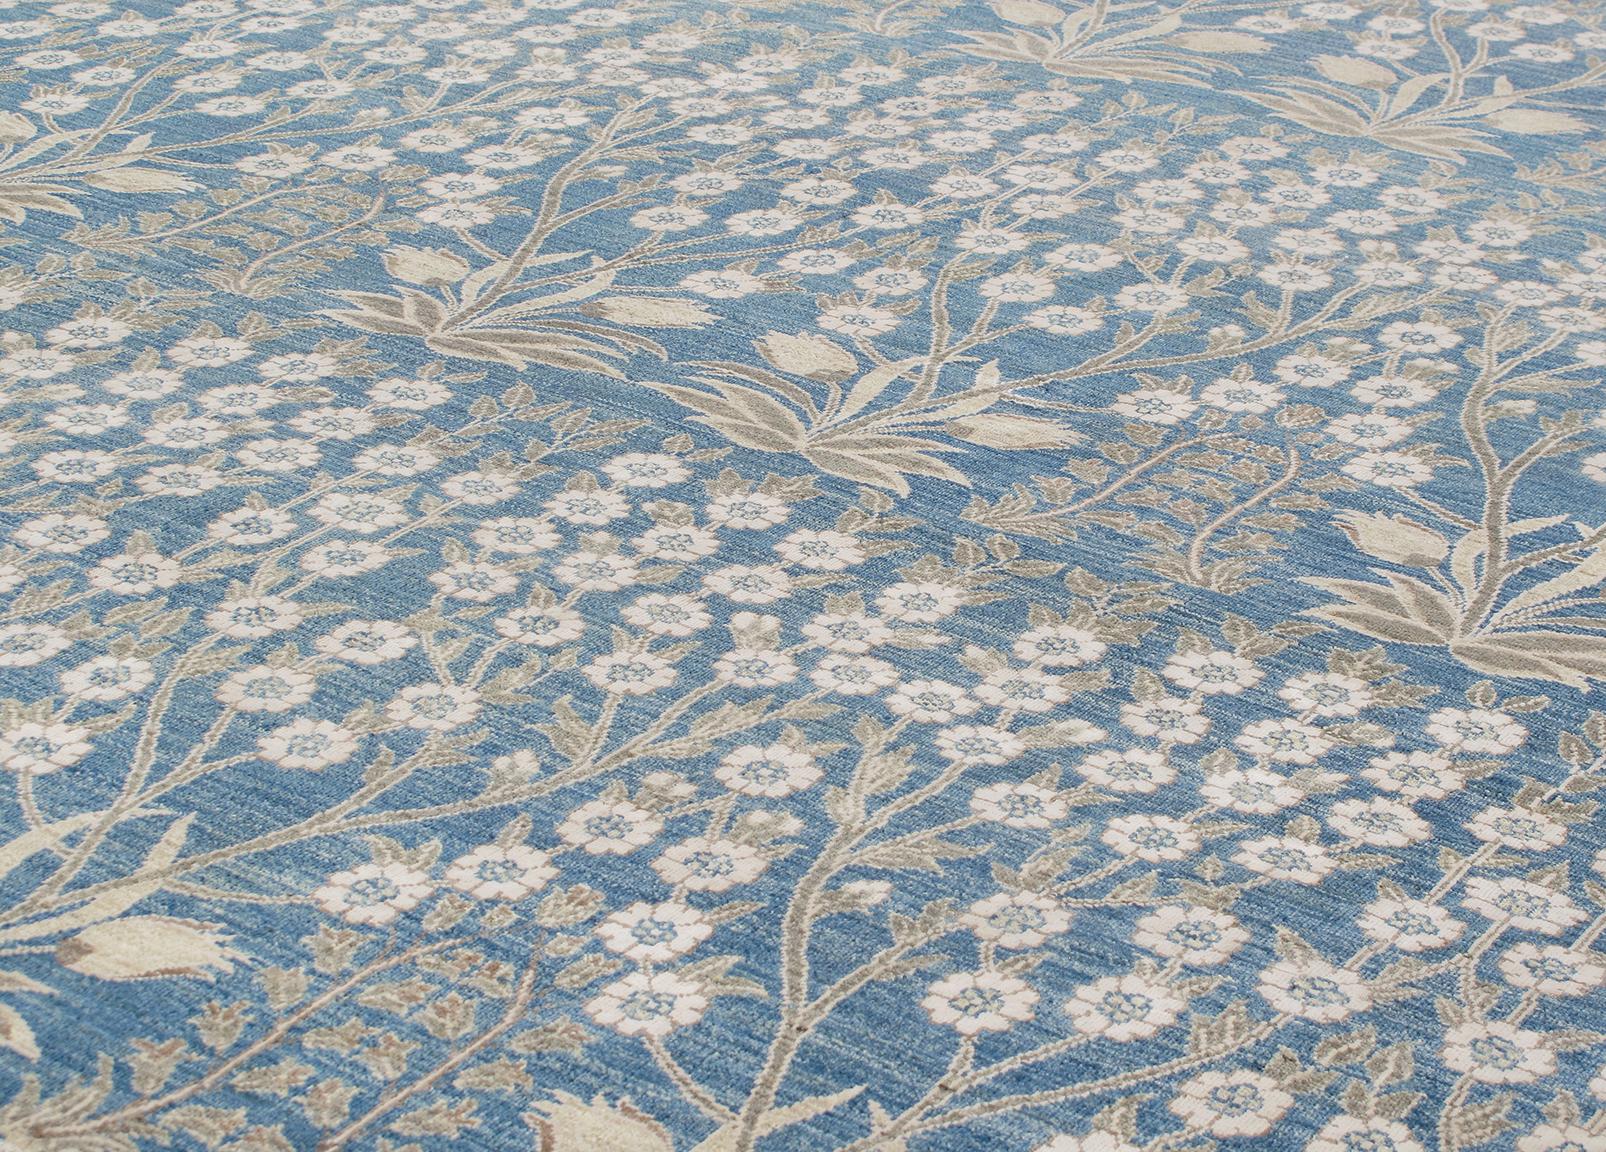 Our contemporary Bidjar rugs are inspired from 16th century Islamic textiles. We adapted those centuries-old designs into more modern, decorative motifs to fit today’s style. These rugs are hand knotted with 100% handspun wool and natural dyes in